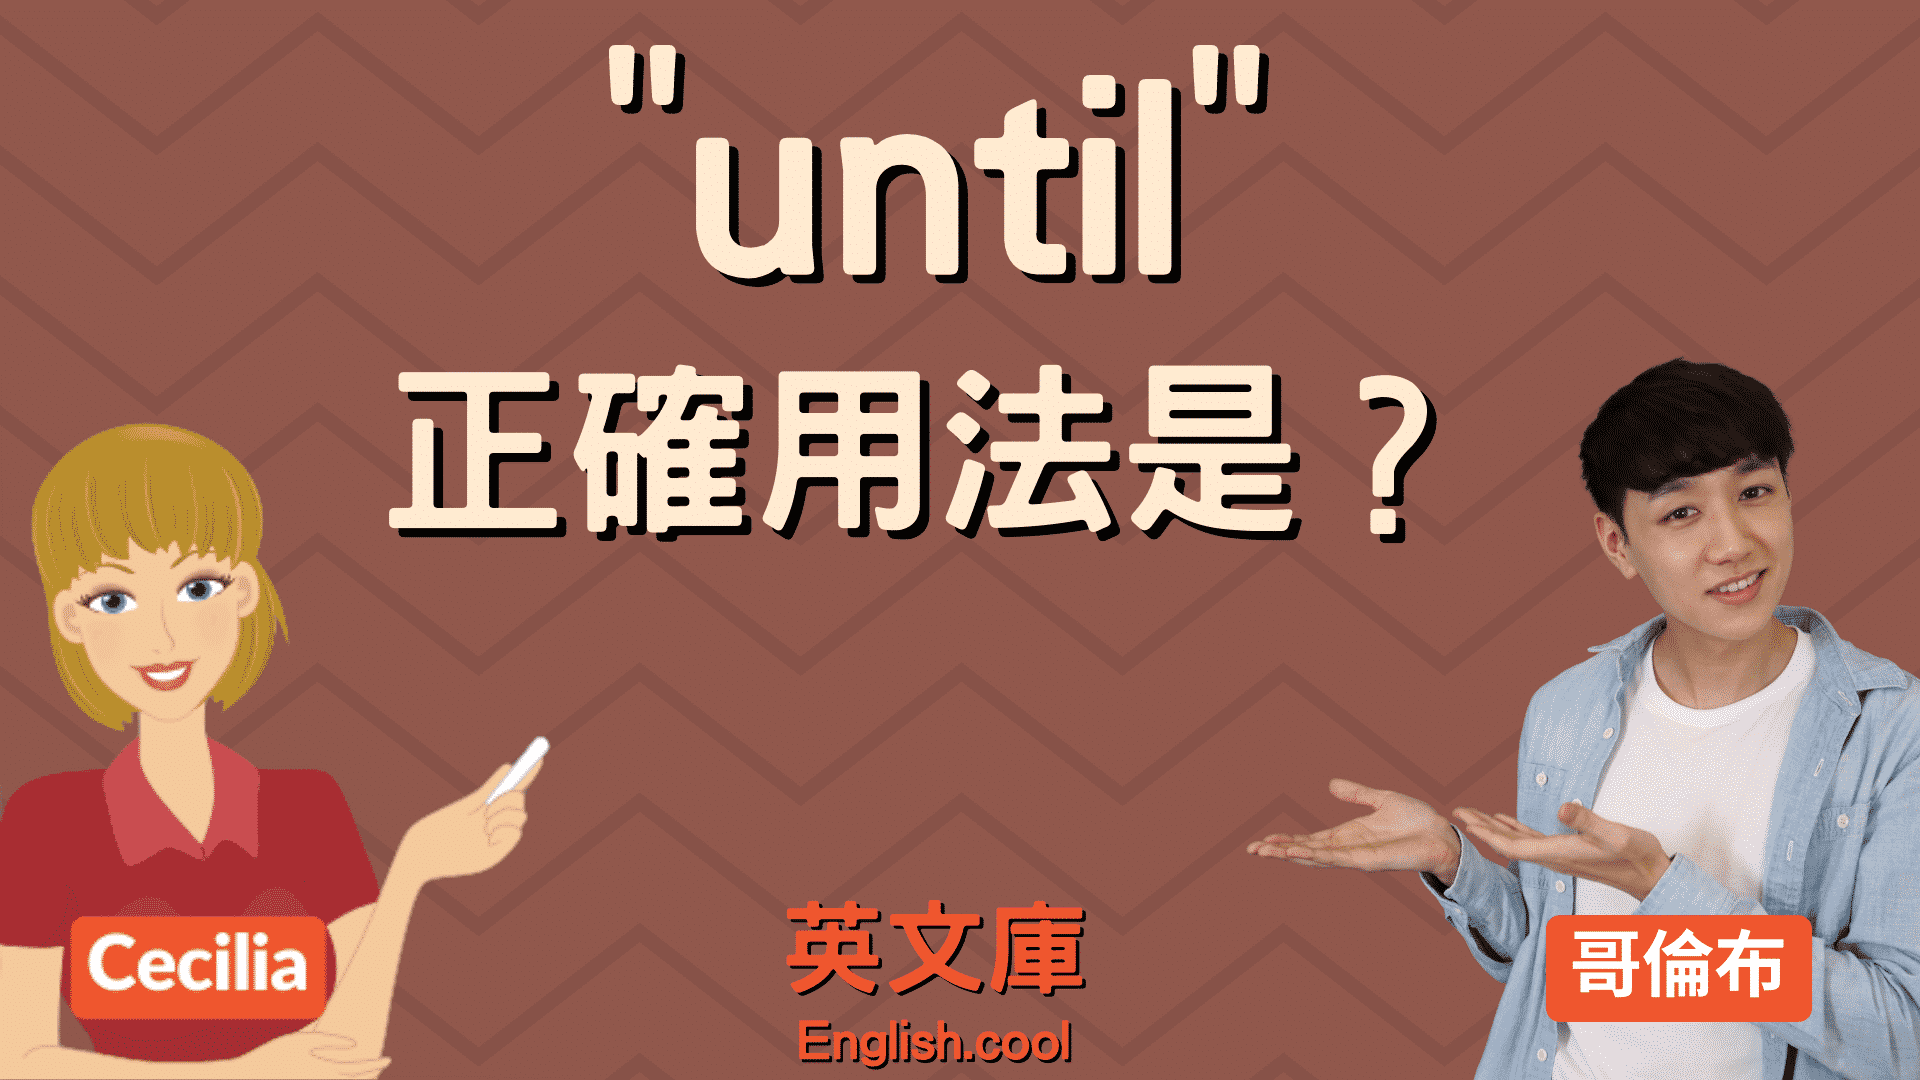 You are currently viewing 「until」正確用法是？「not until」正確用法是？（含例句）